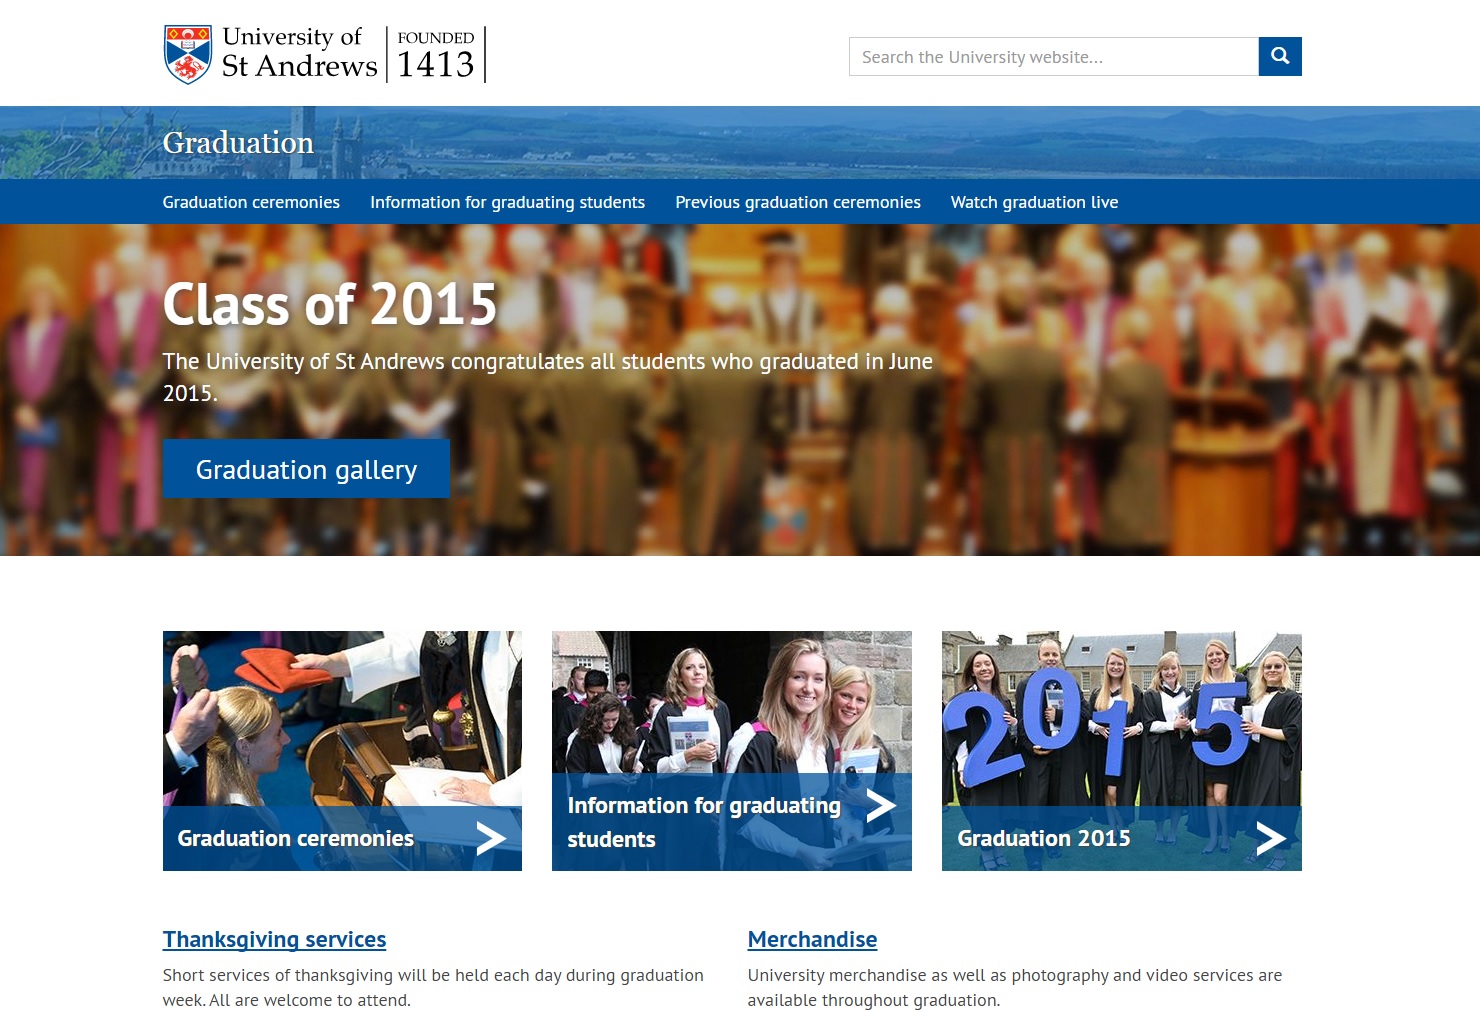 New responsive design graduation webpages from the University of St Andrews